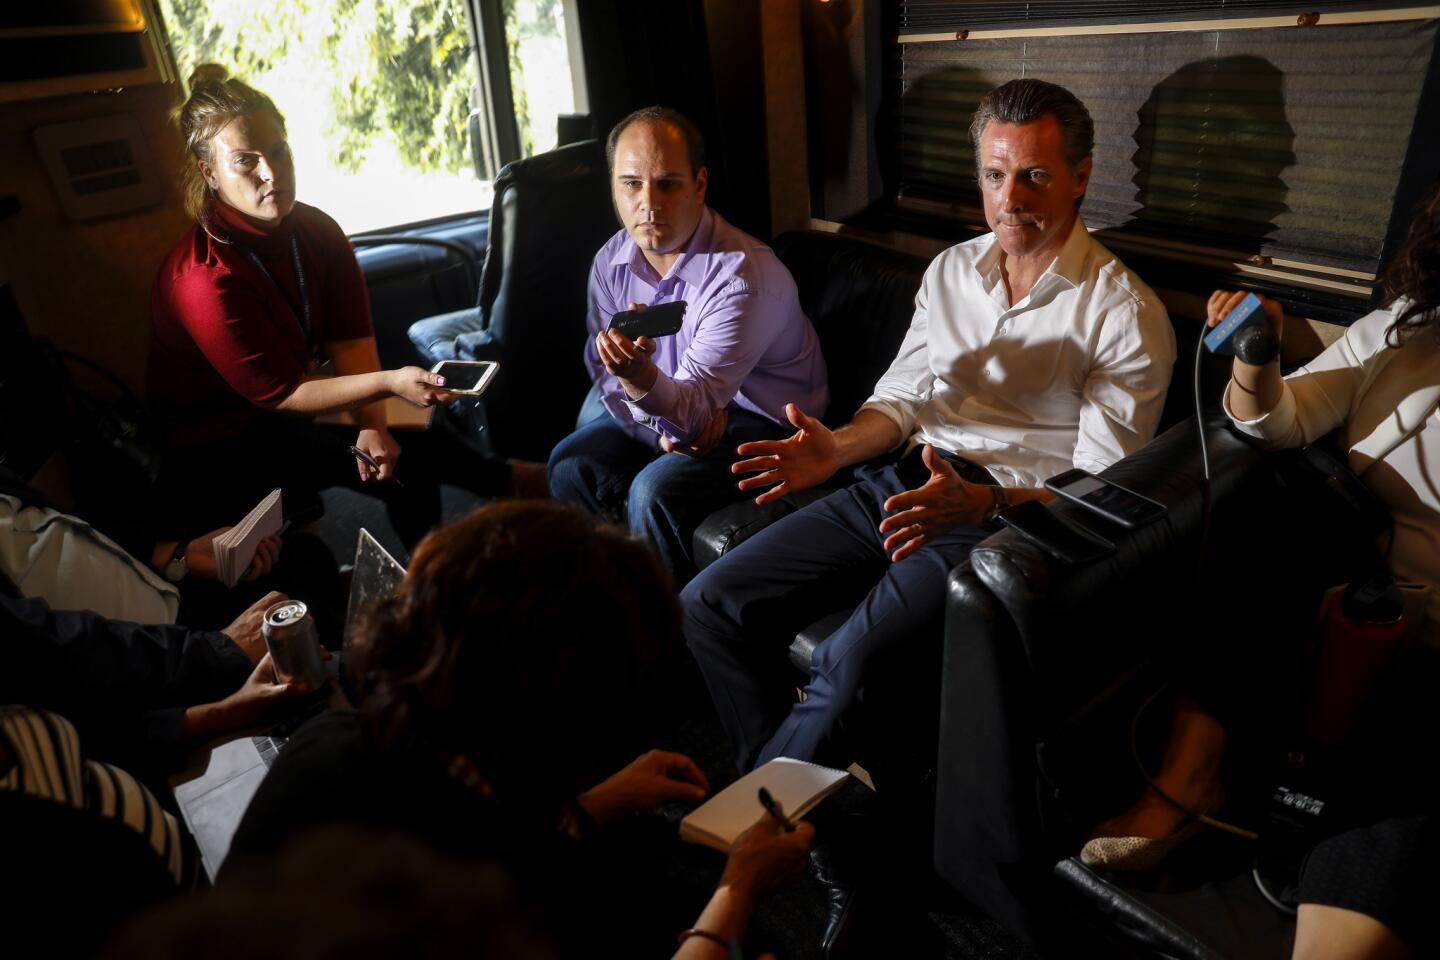 Democratic candidate for governor Gavin Newsom speaks to reporters on his campaign bus after departing San Francisco for a weeklong tour.